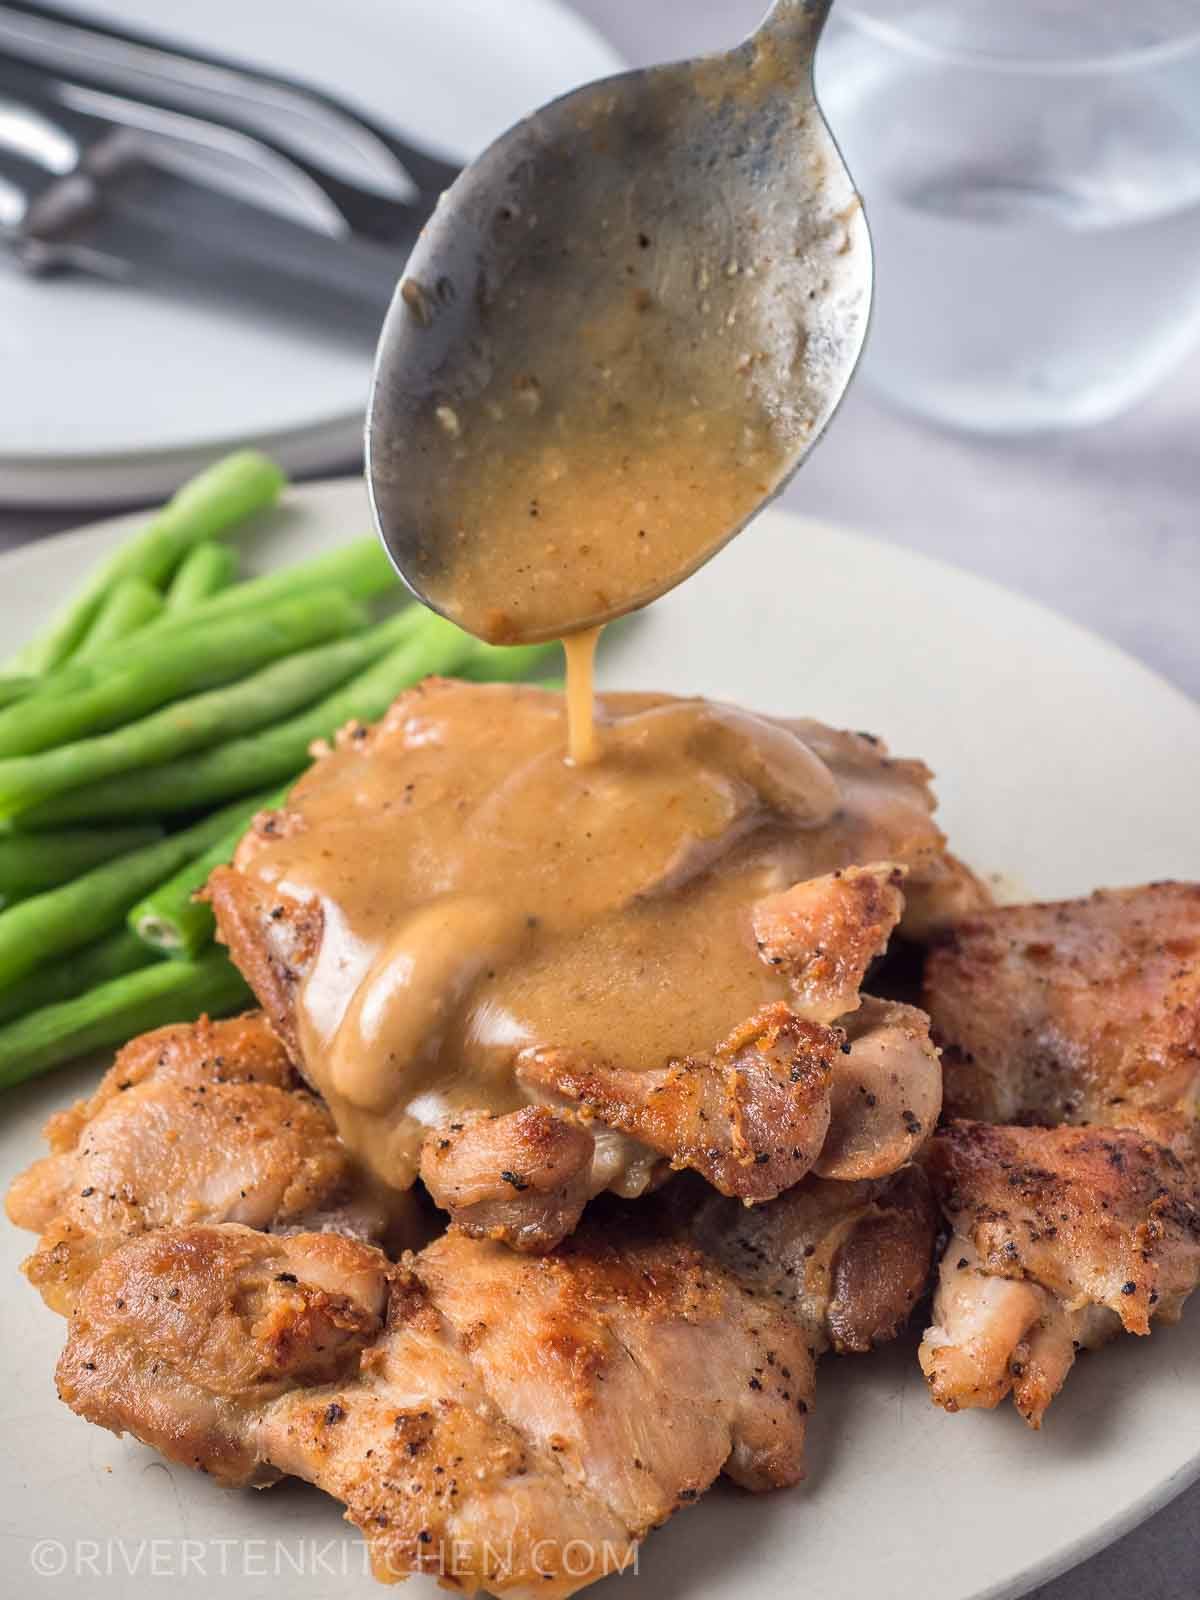 Pan-fried chicken thighs topped with mushroom gravy